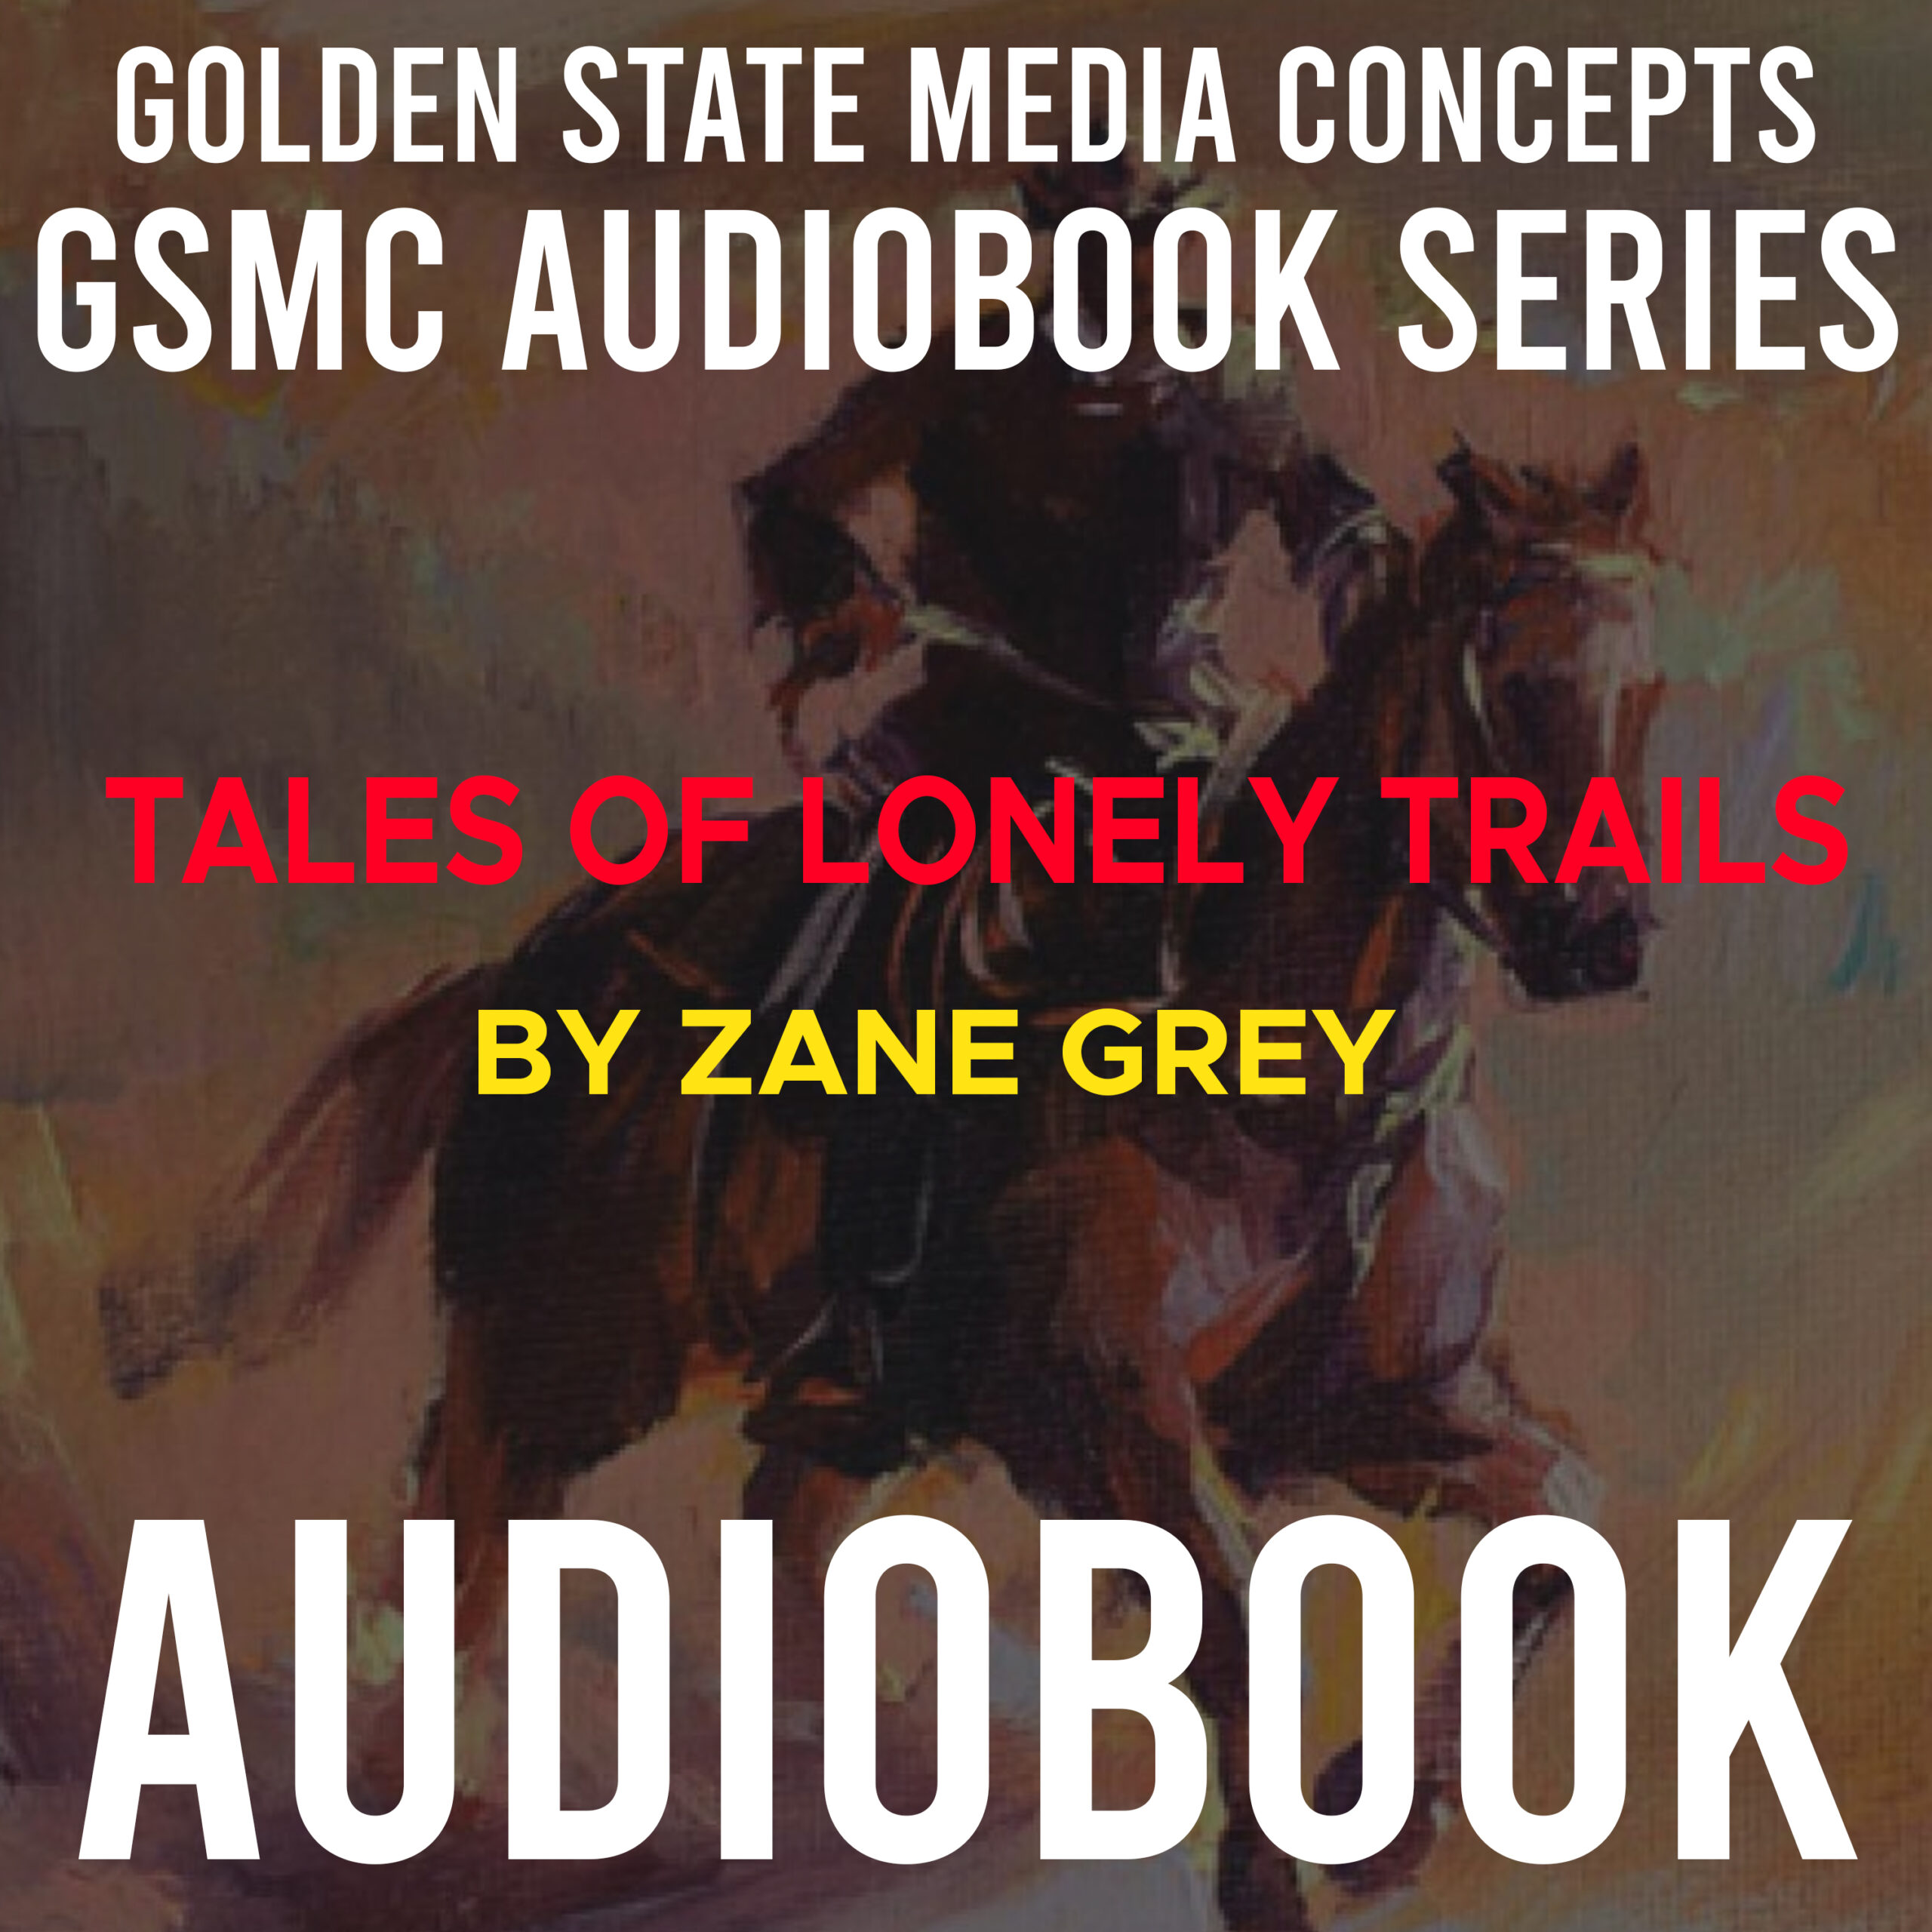 GSMC Audiobook Series: Tales of Lonely Trails